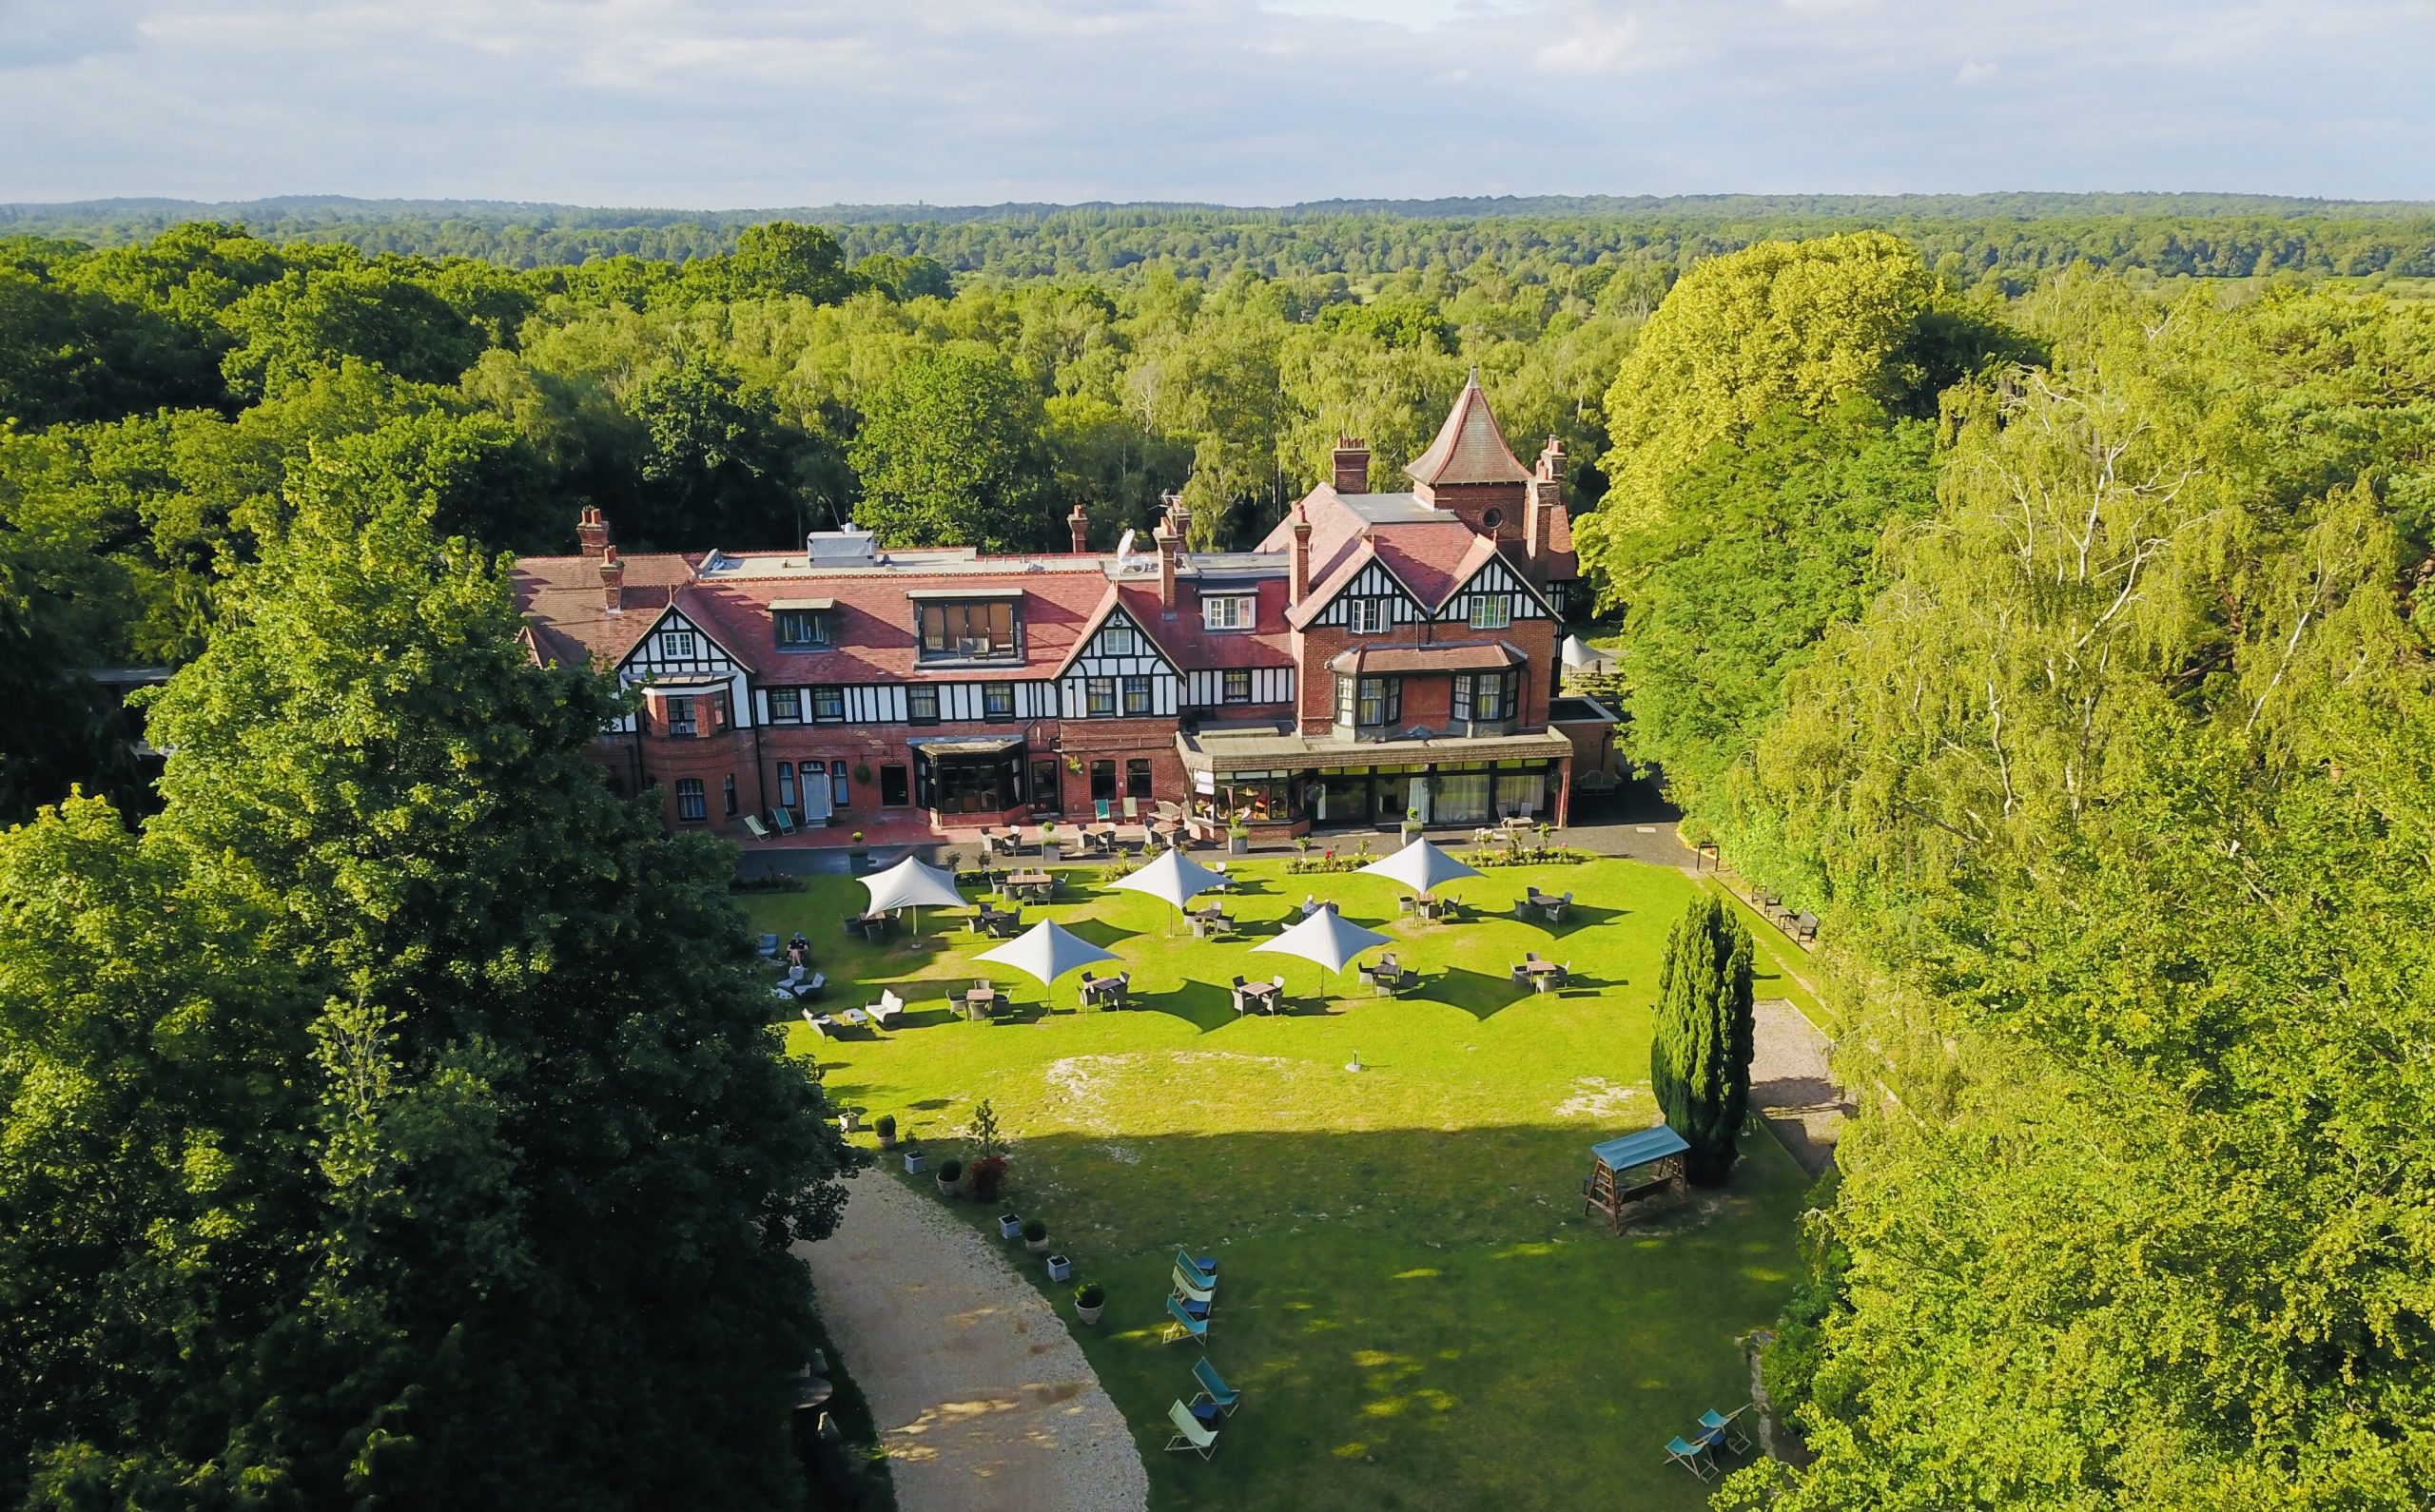 The Forest Park Country Hotel & Inn